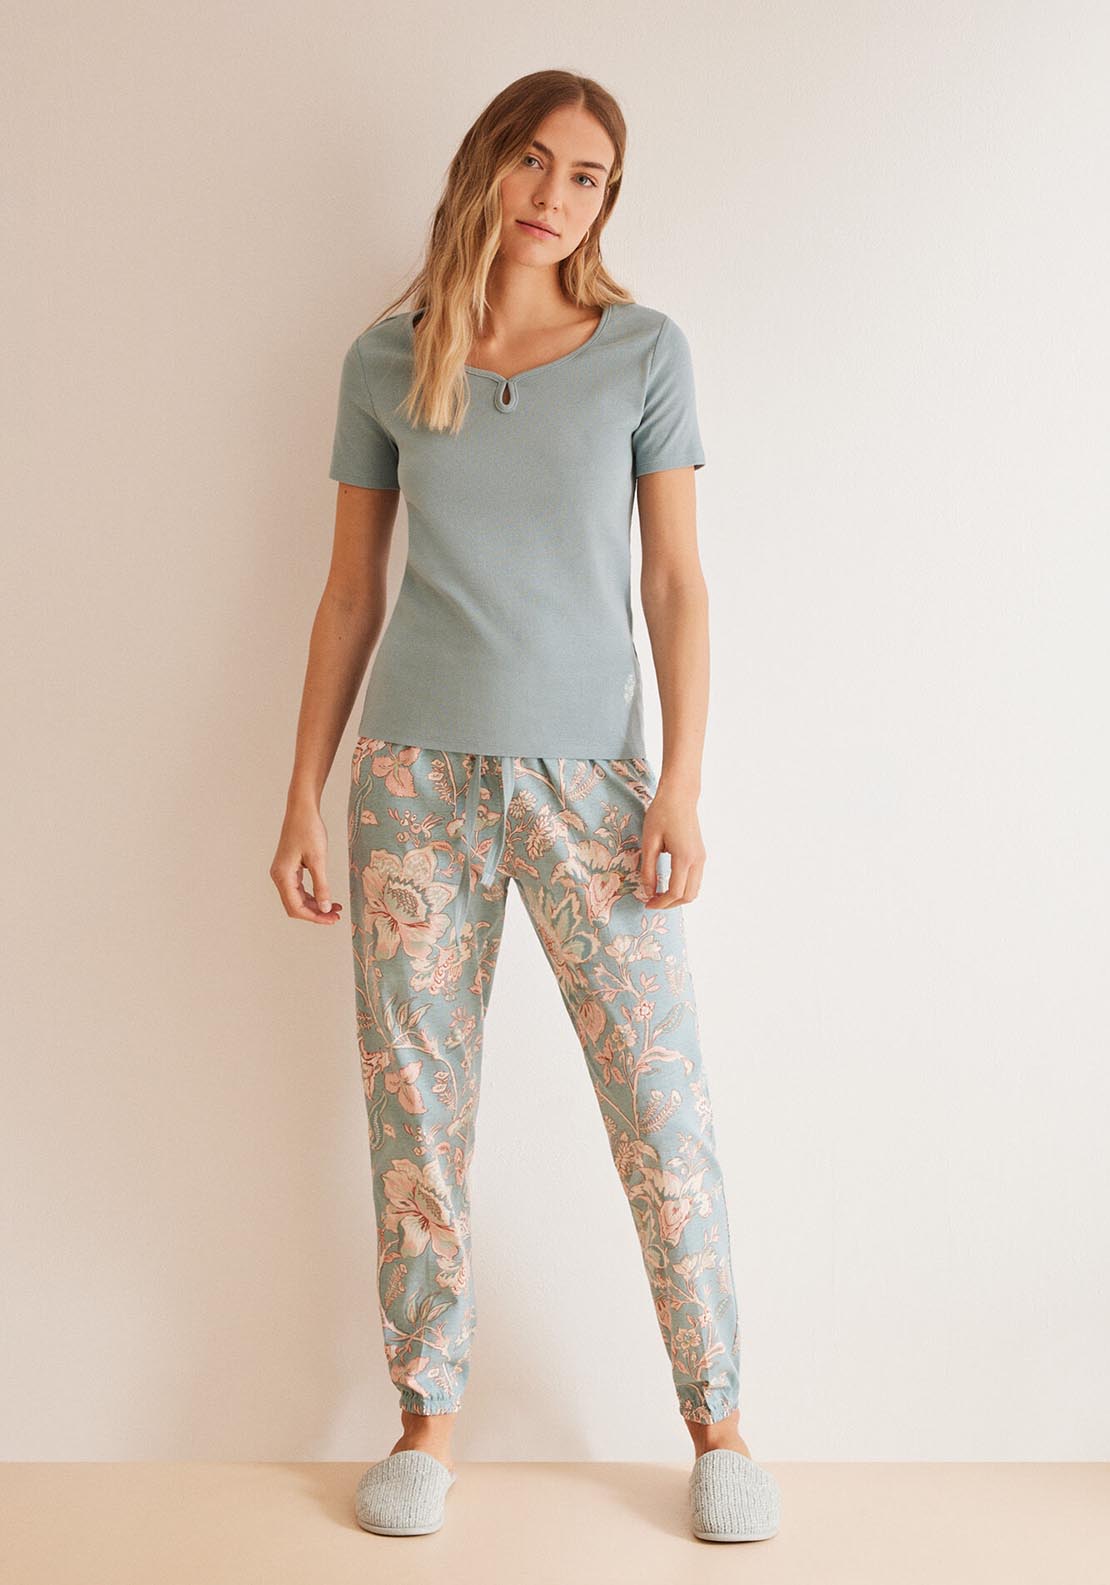 Womens Secret Blue pyjamas in 100% cotton with floral print bottoms - Blue 1 Shaws Department Stores